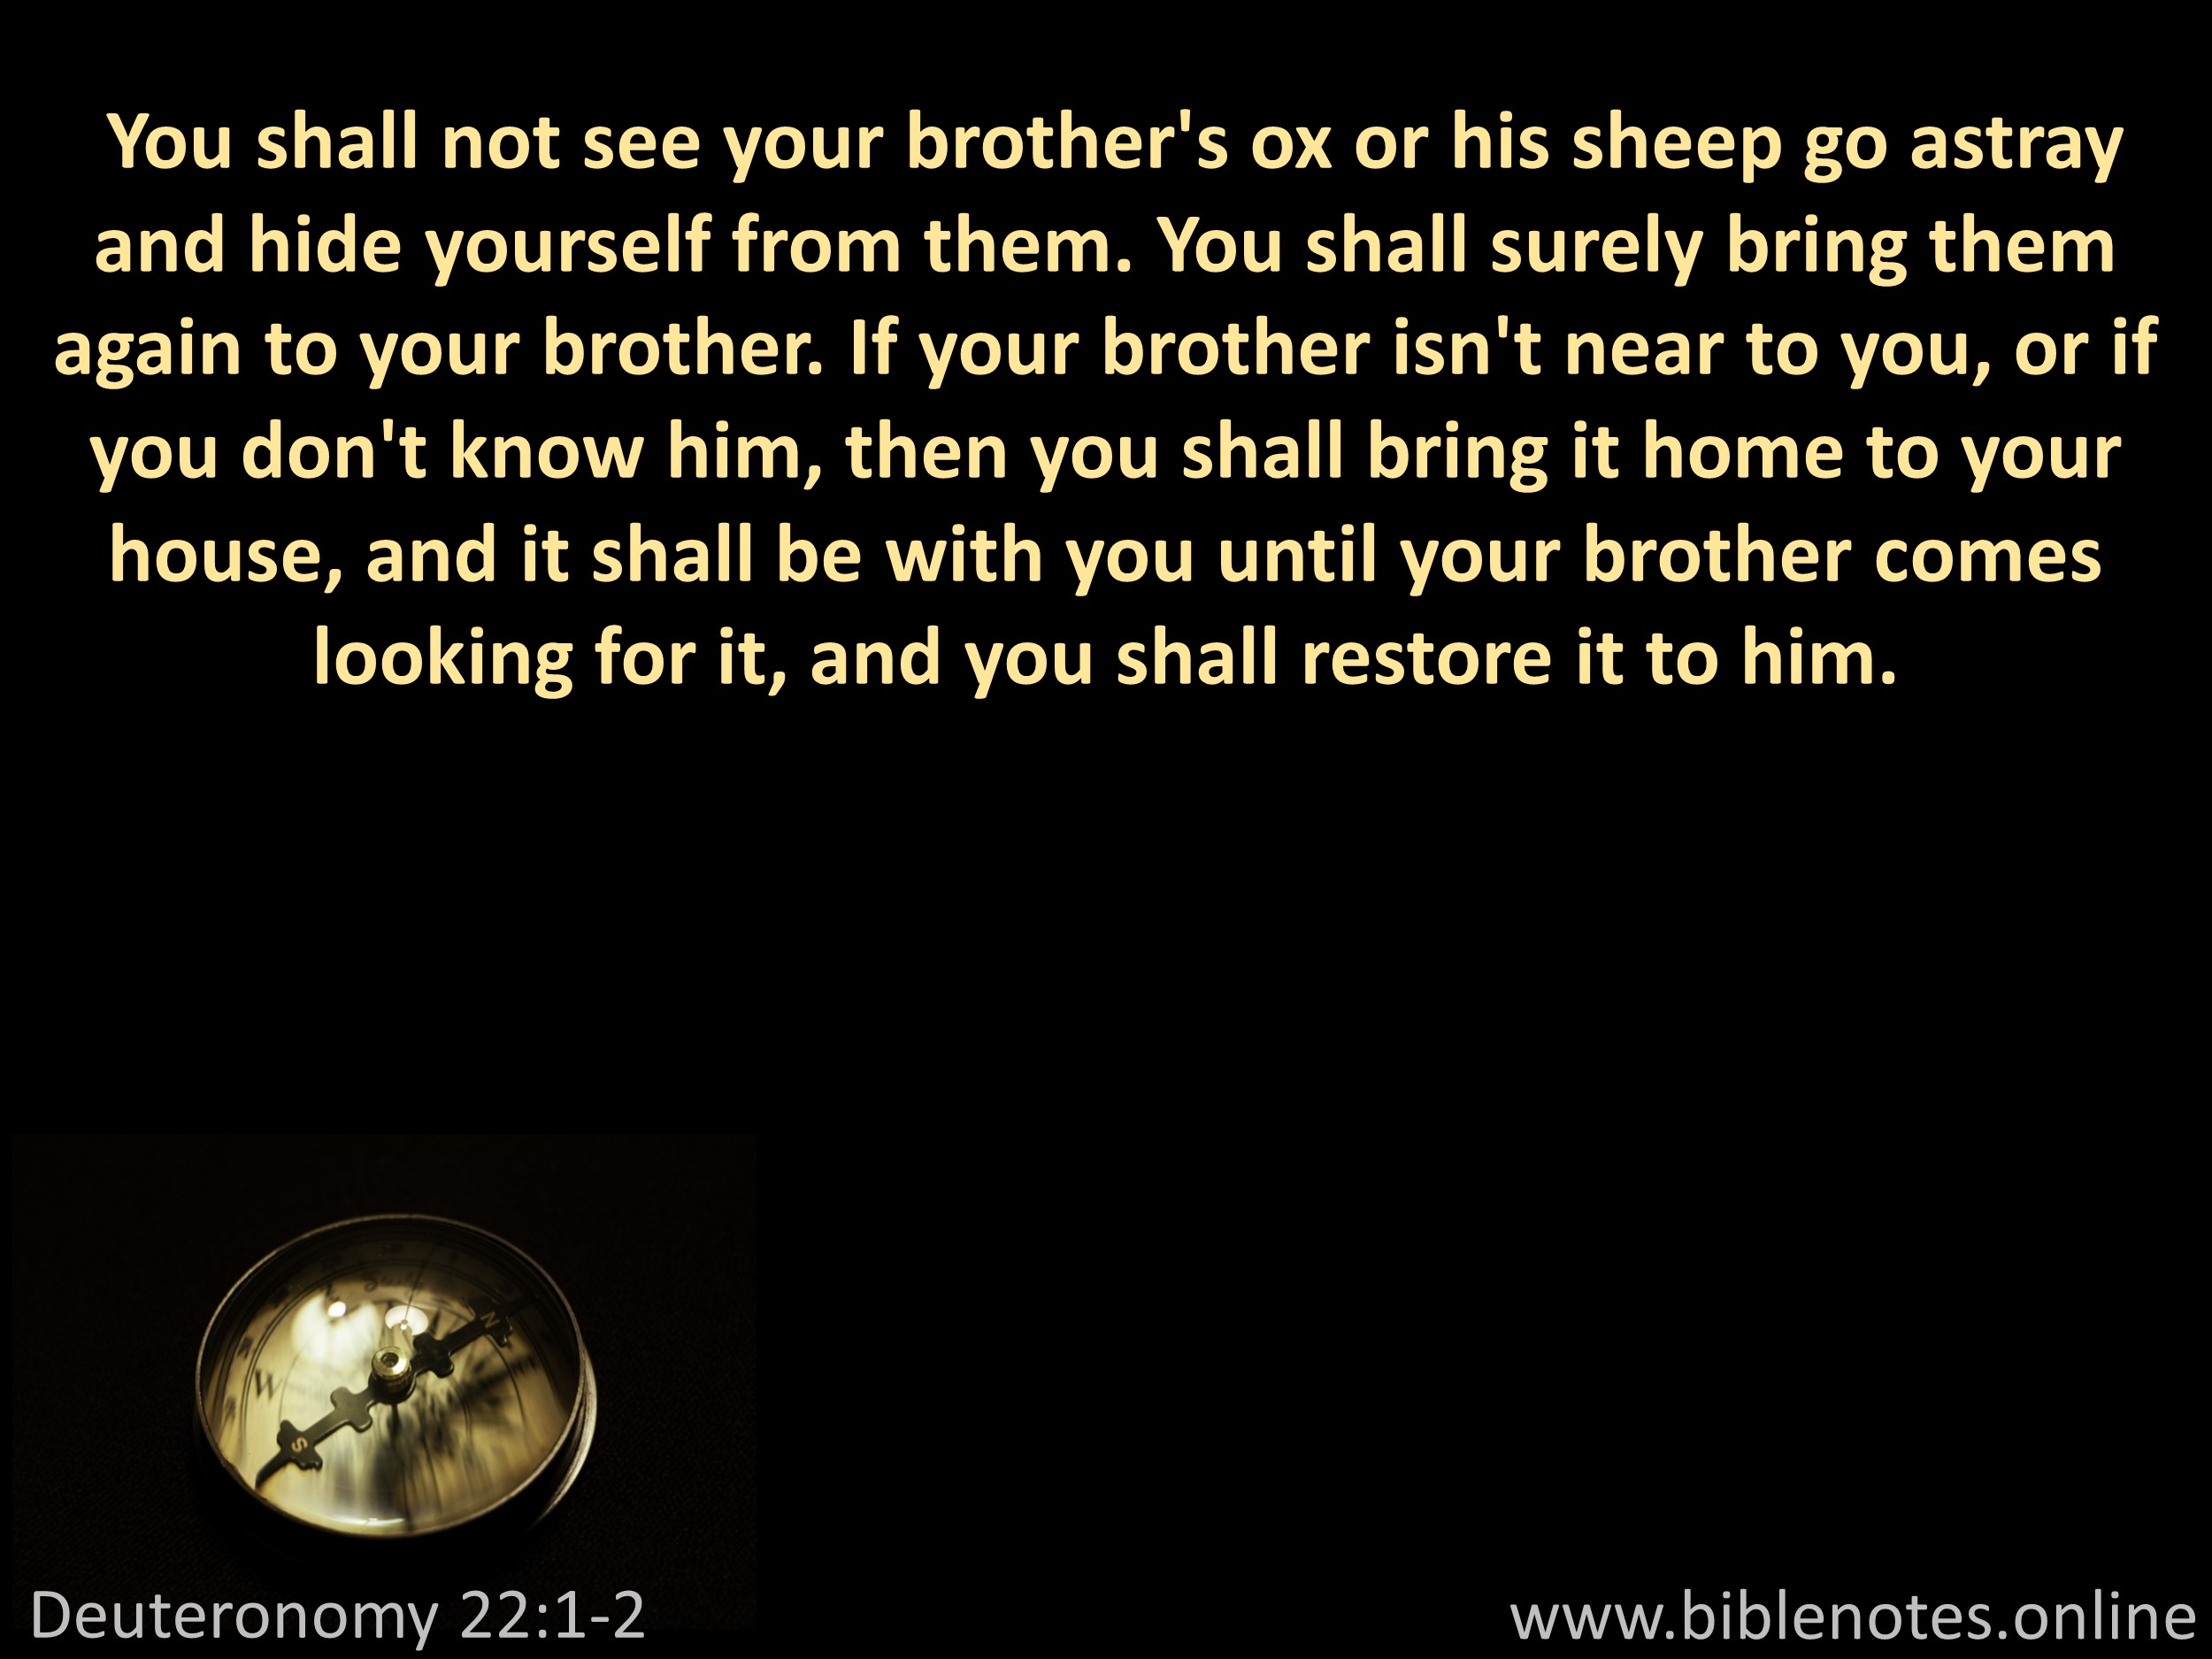 Bible Verse from Deuteronomy Chapter 22